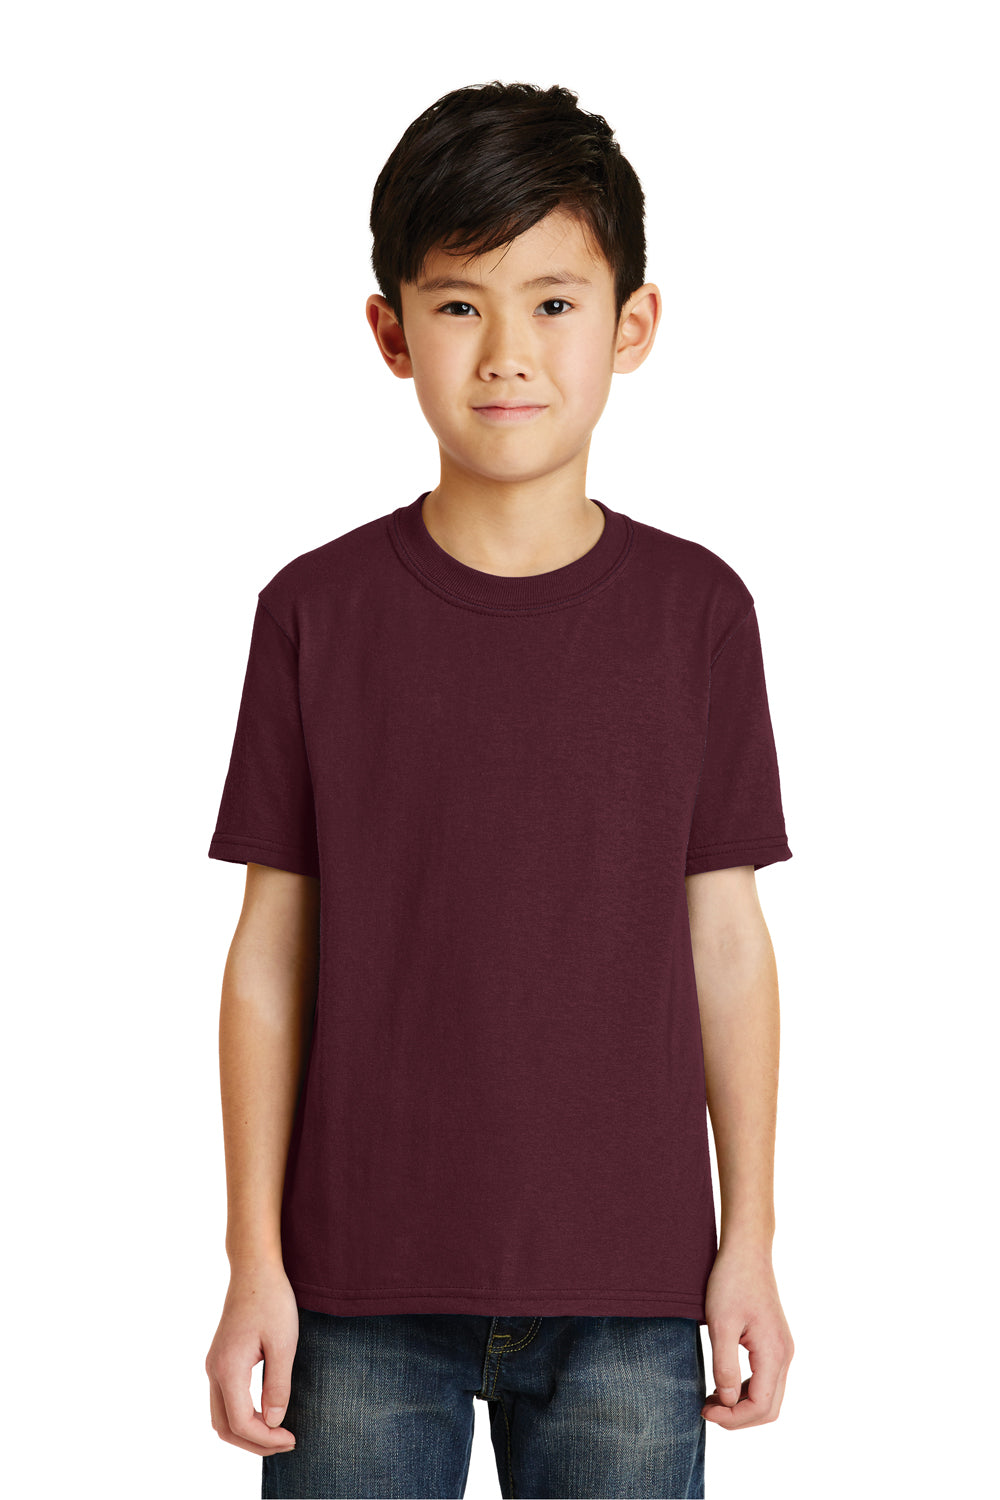 Port & Company PC55Y Youth Core Short Sleeve Crewneck T-Shirt Maroon Front